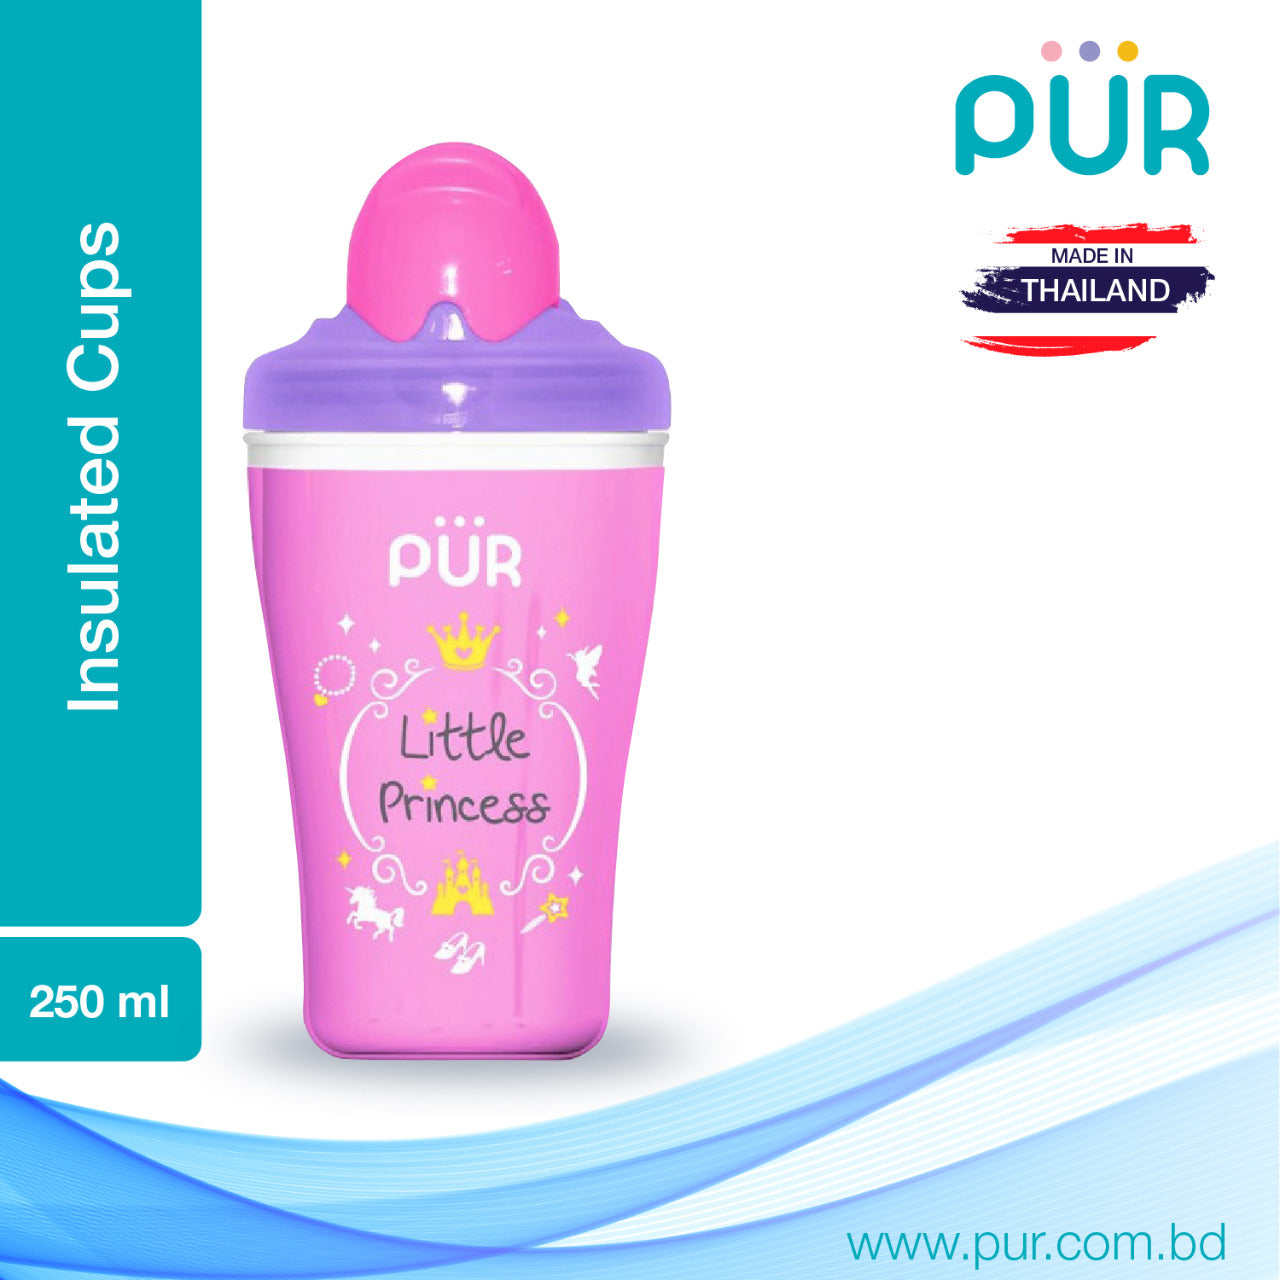 Pur insulated straw cup 8oz/250ml